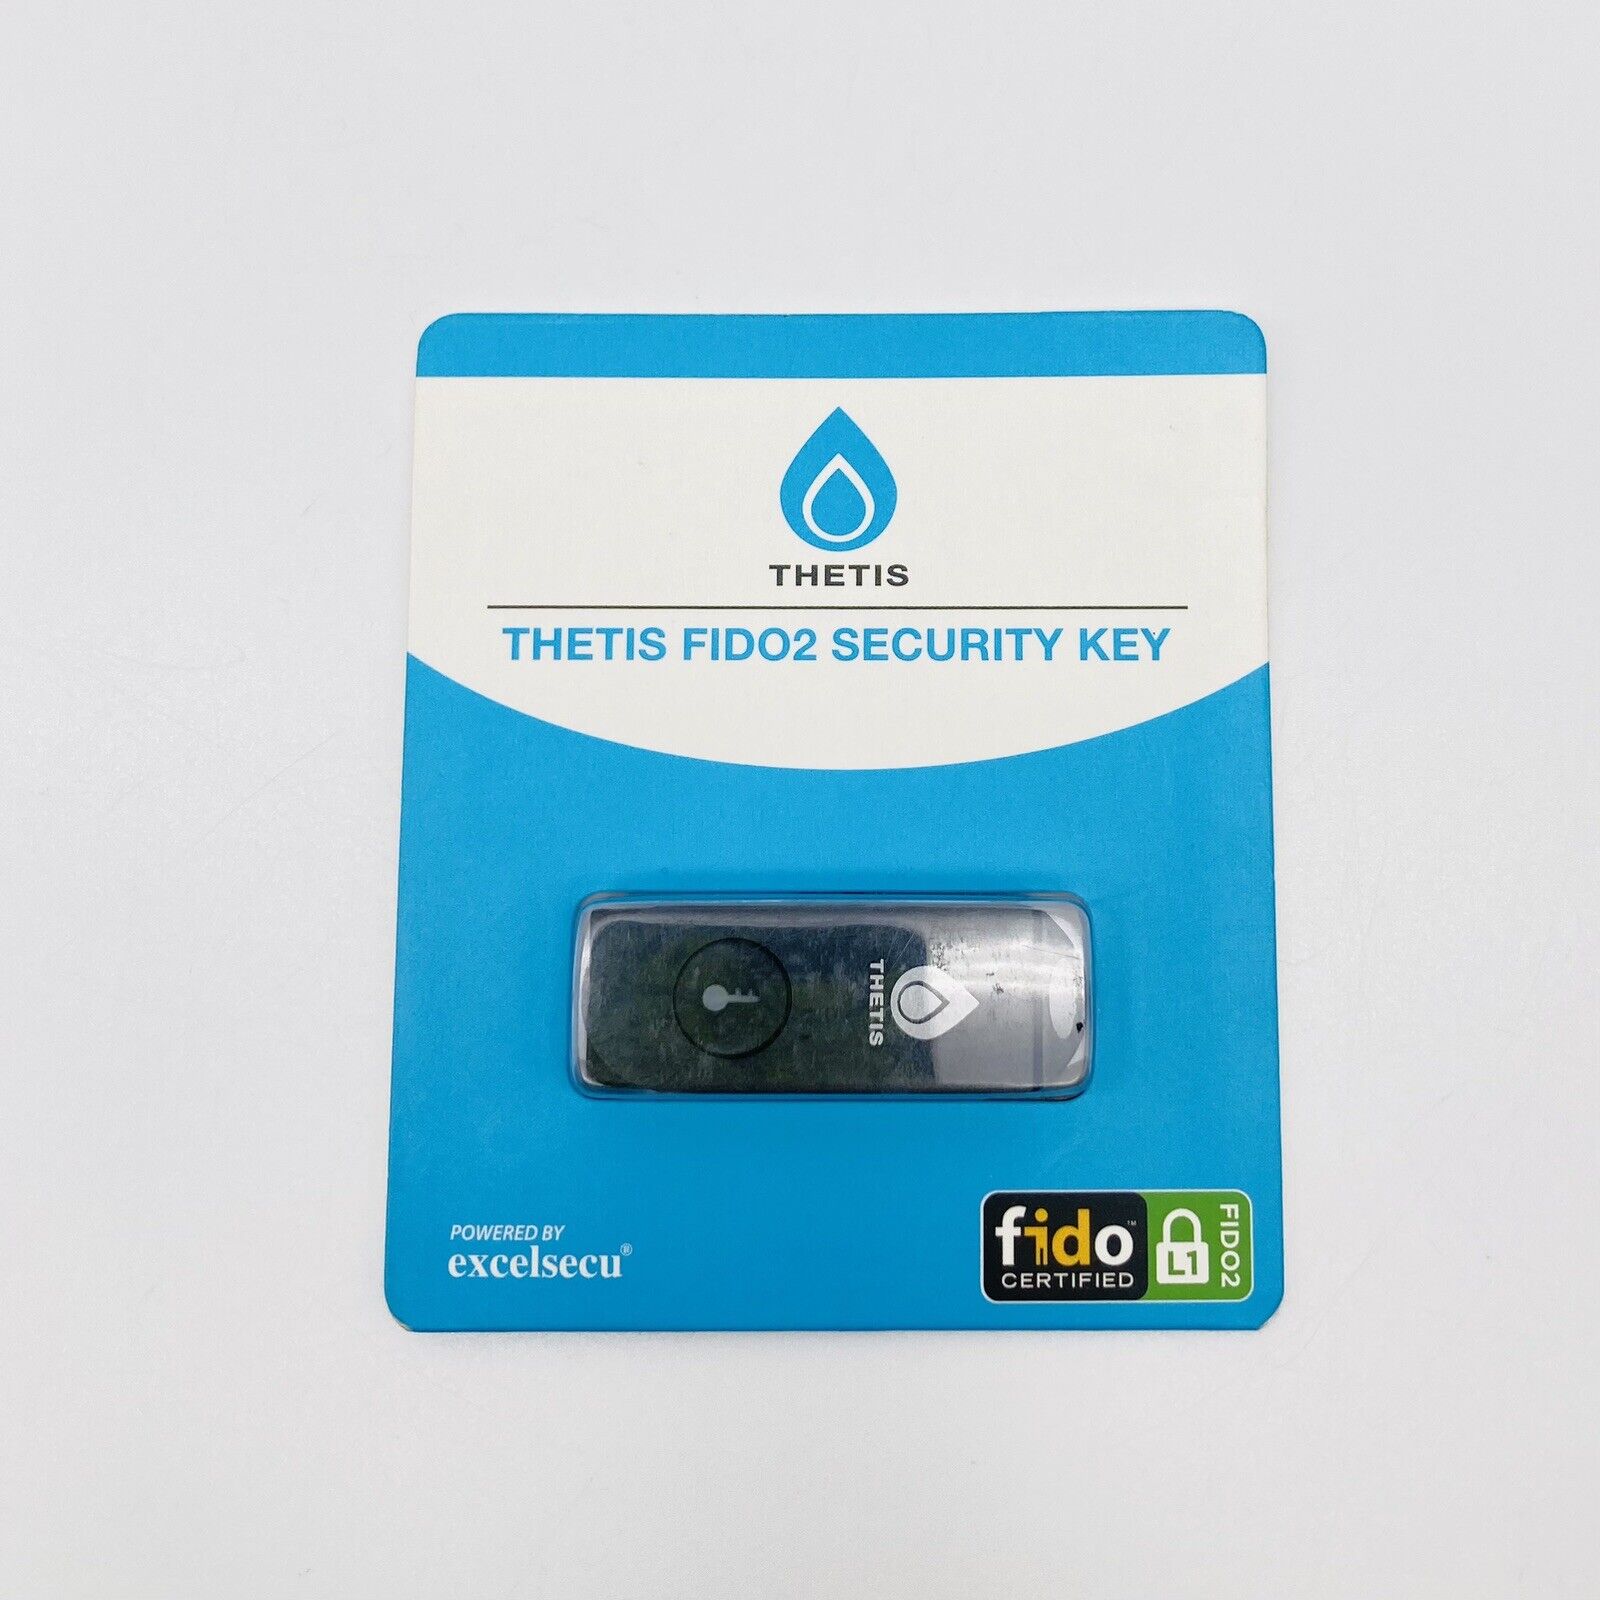 FIDO2 Security Key Thetis Universal Two Factor Authentication USB - New